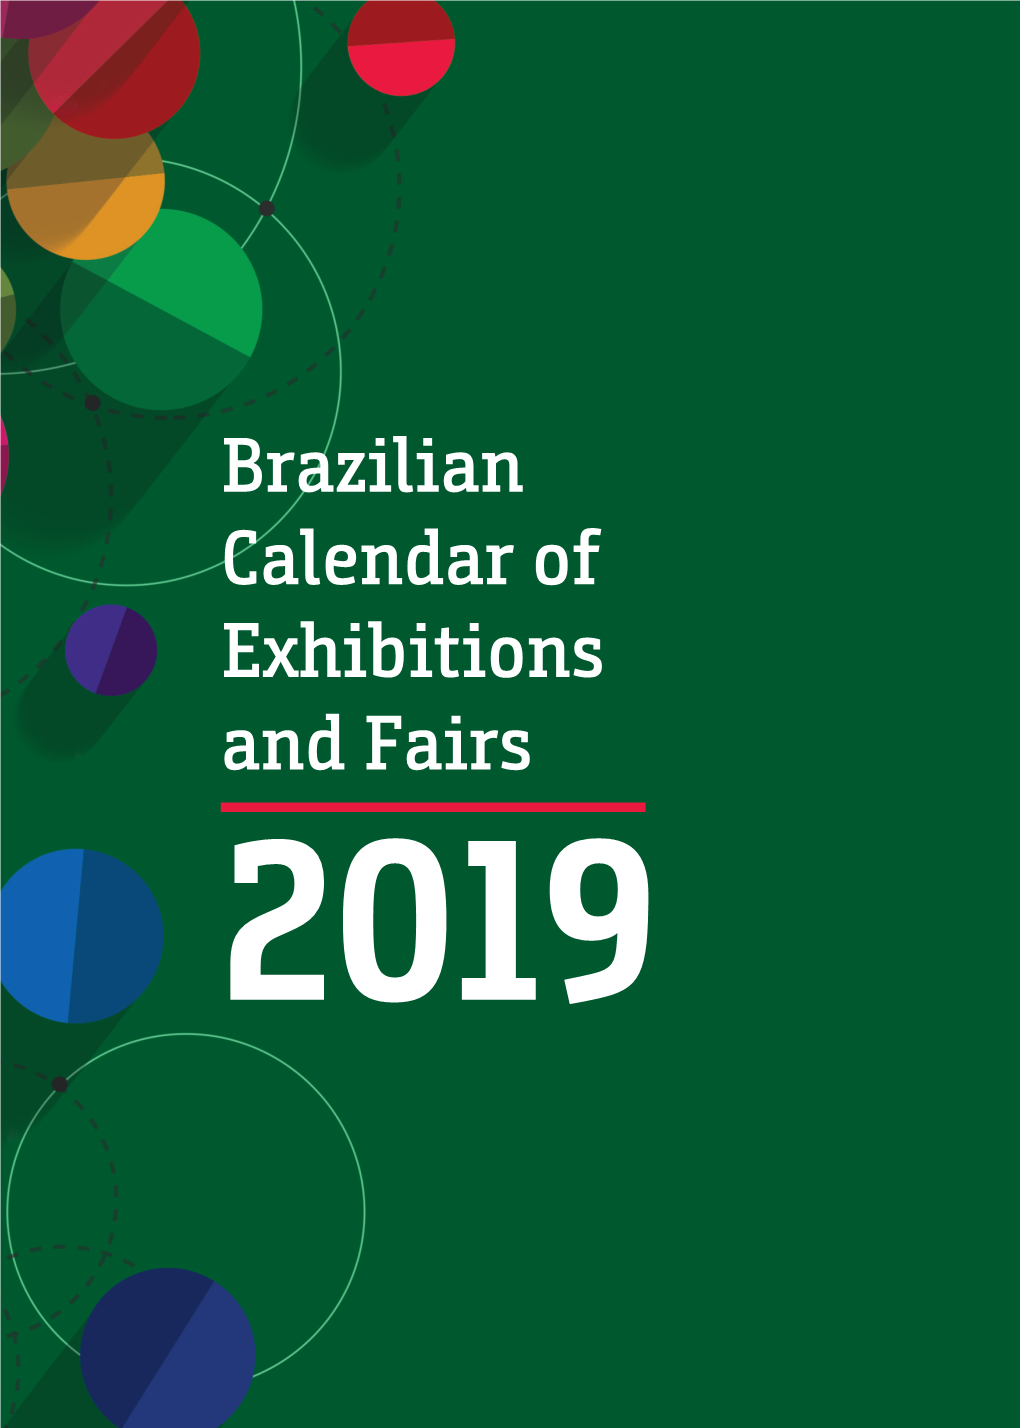 Brazilian Calendar of Exhibitions and Fairs 2019 BRAZILIAN CALENDAR of EXHIBITIONS and FAIRS